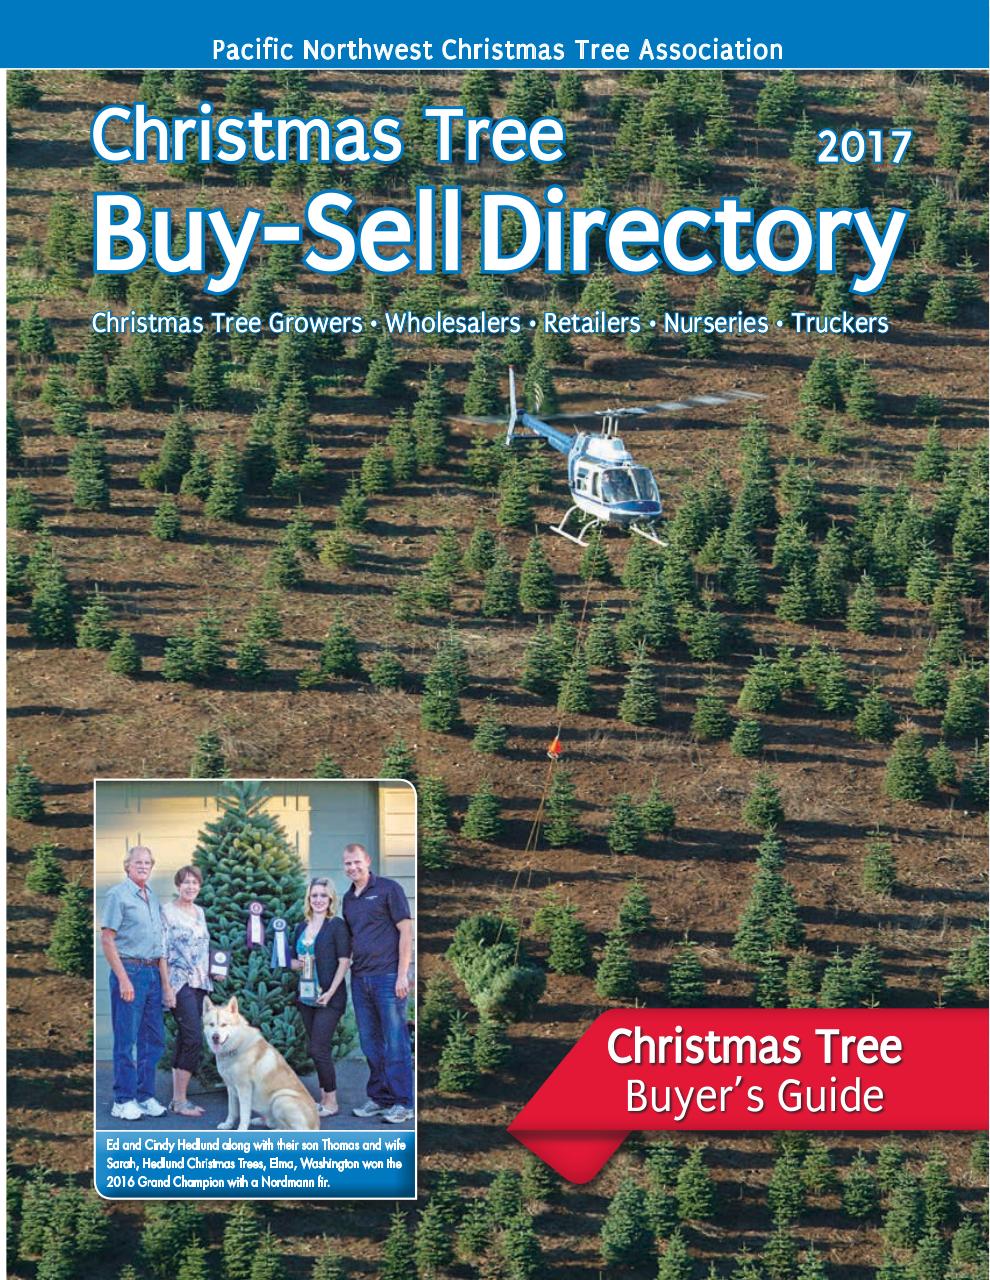 pnwcta-buy-sell-directory-2017.pdf - page 1/32